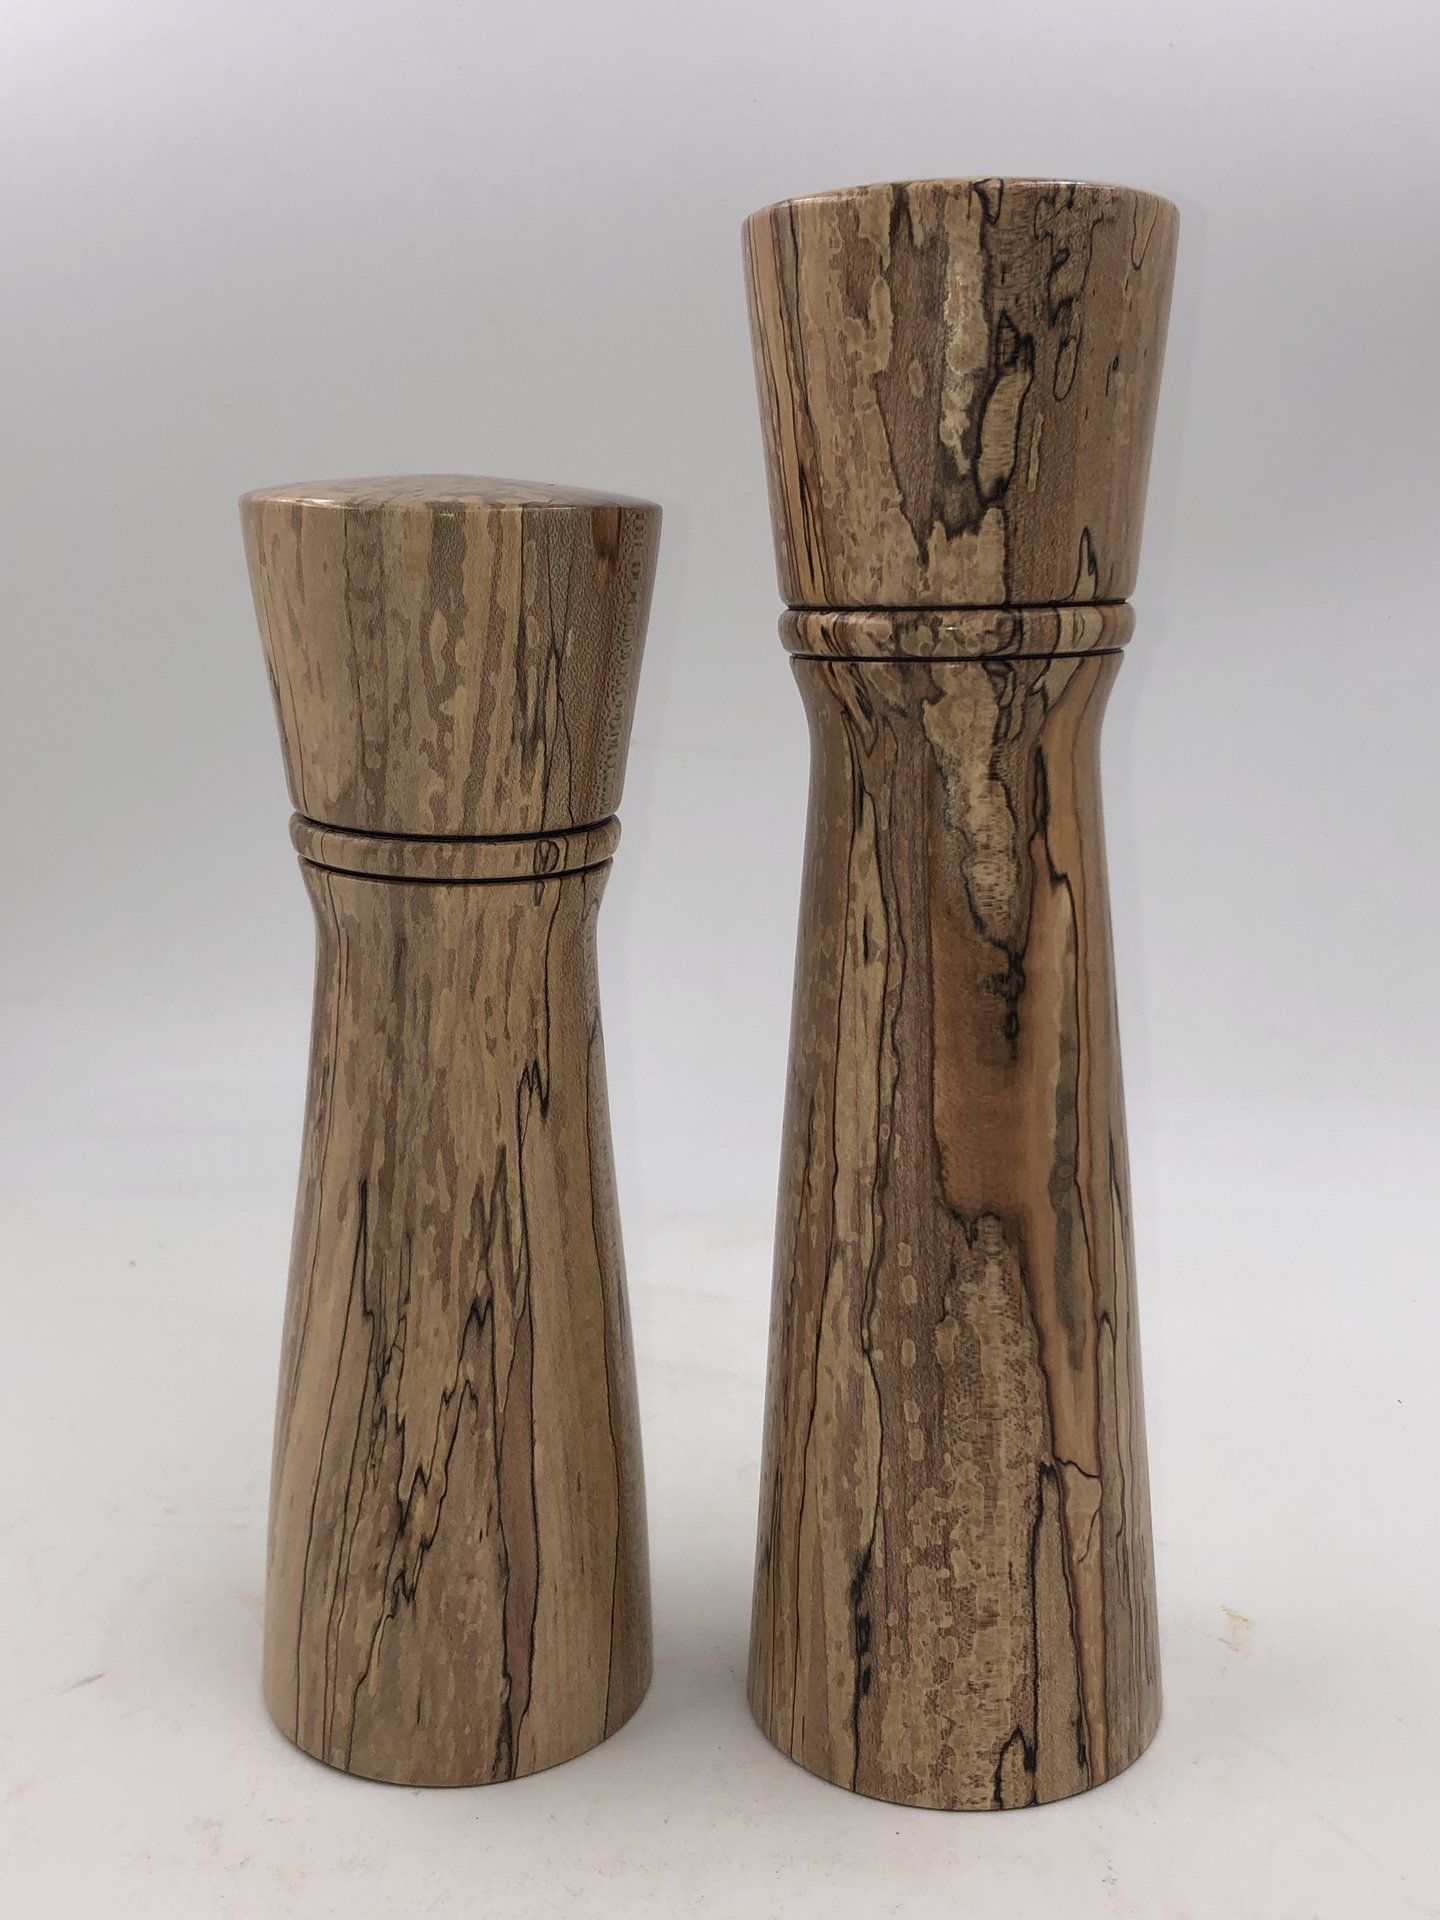 Spalted ambrosia maple pepper and salt mills.